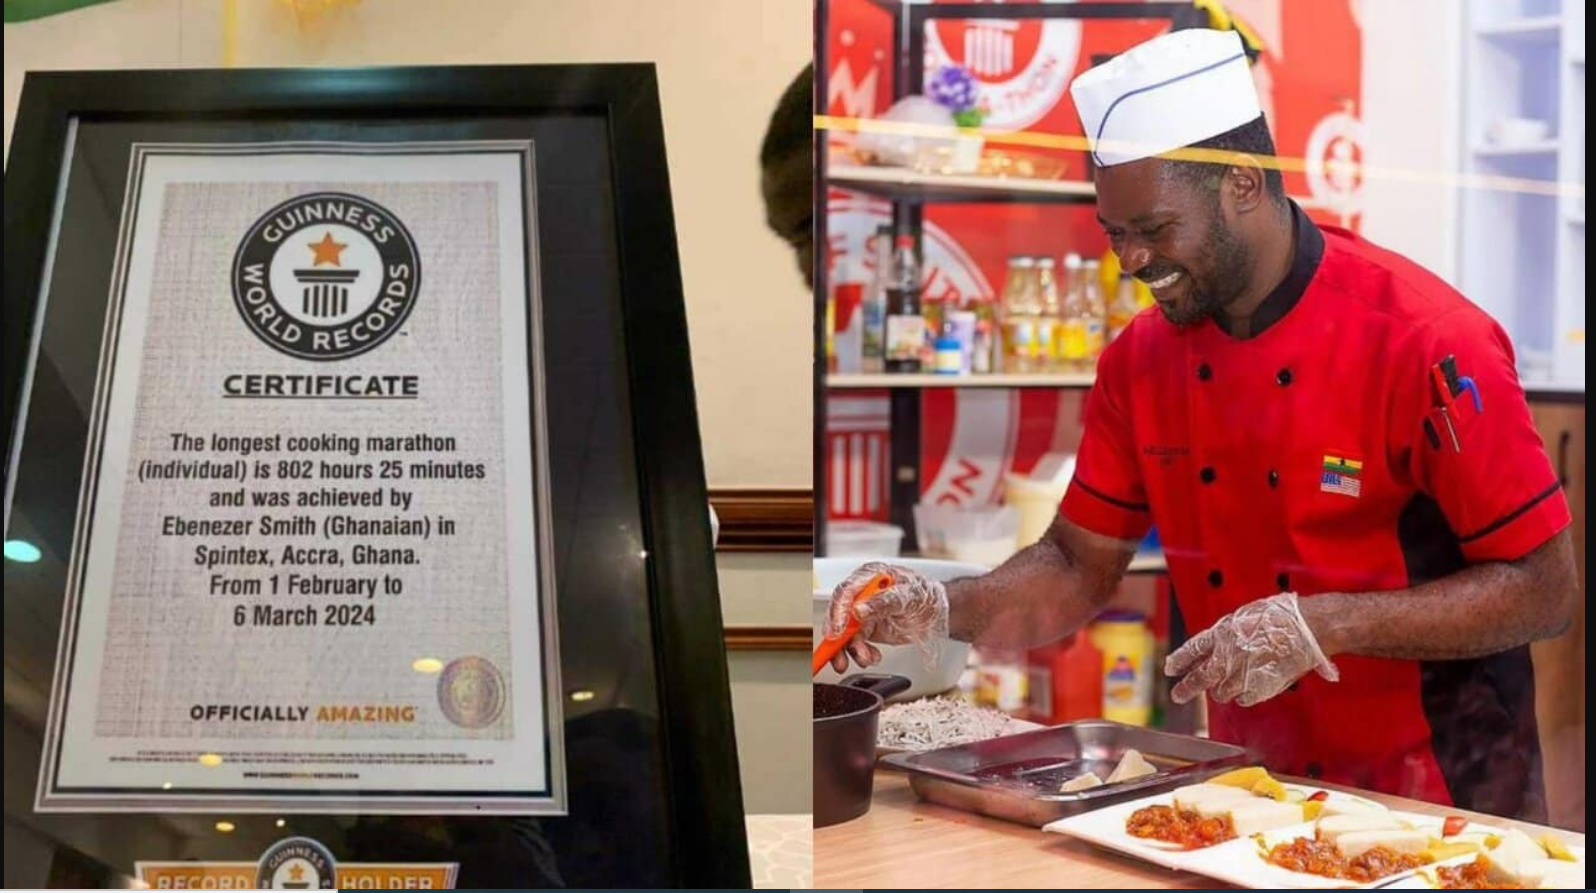 Manager insists Chef Smith received official GWR email despite denial of record title